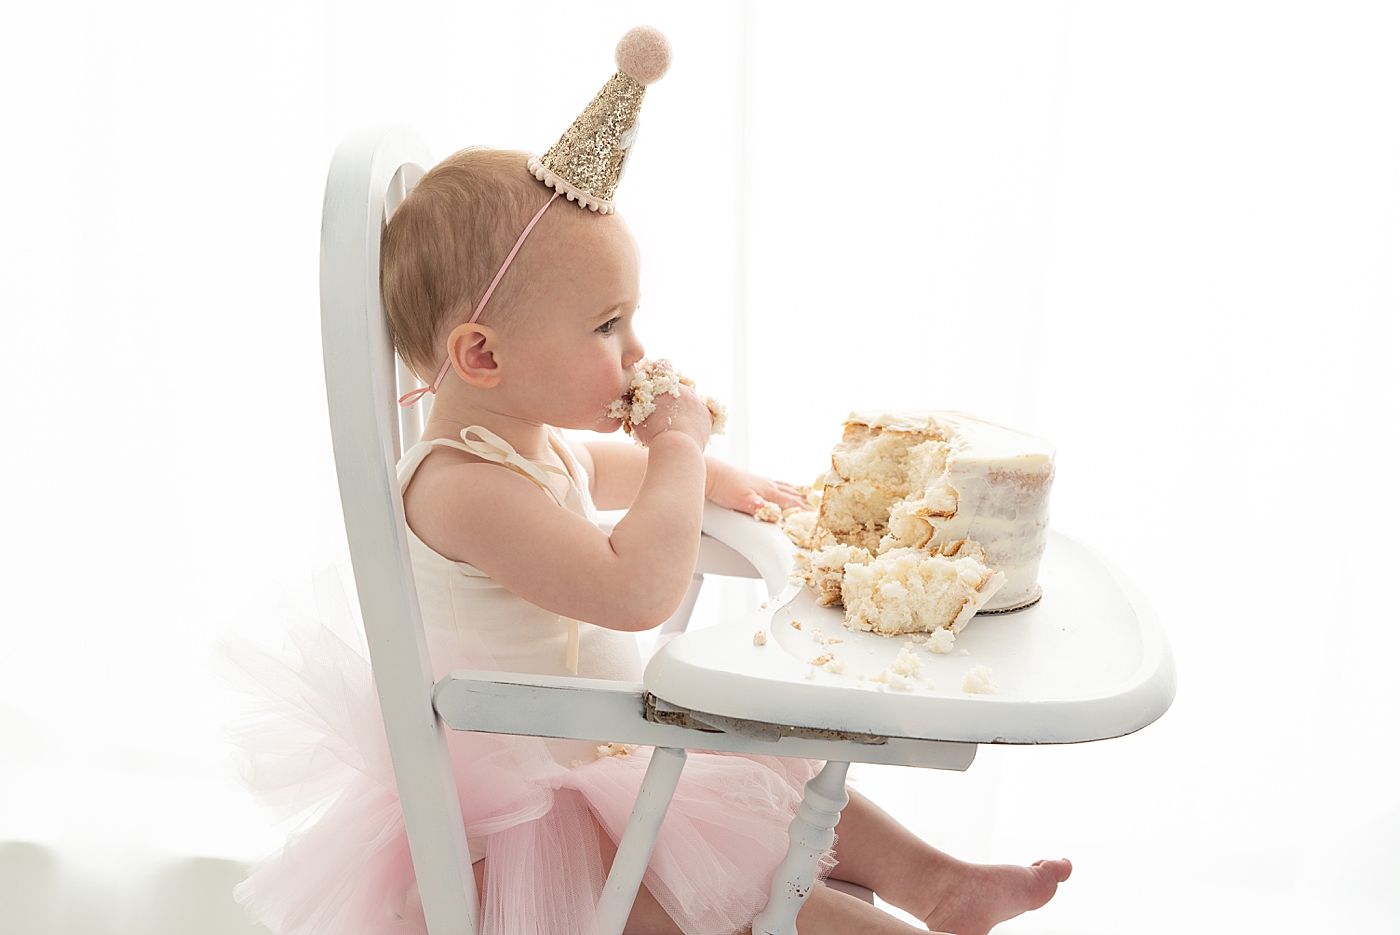 Cake Smash and One Year Old Photoshoot in Chagrin Falls Photography Studio. Photos by Rachel Brookes Photography.